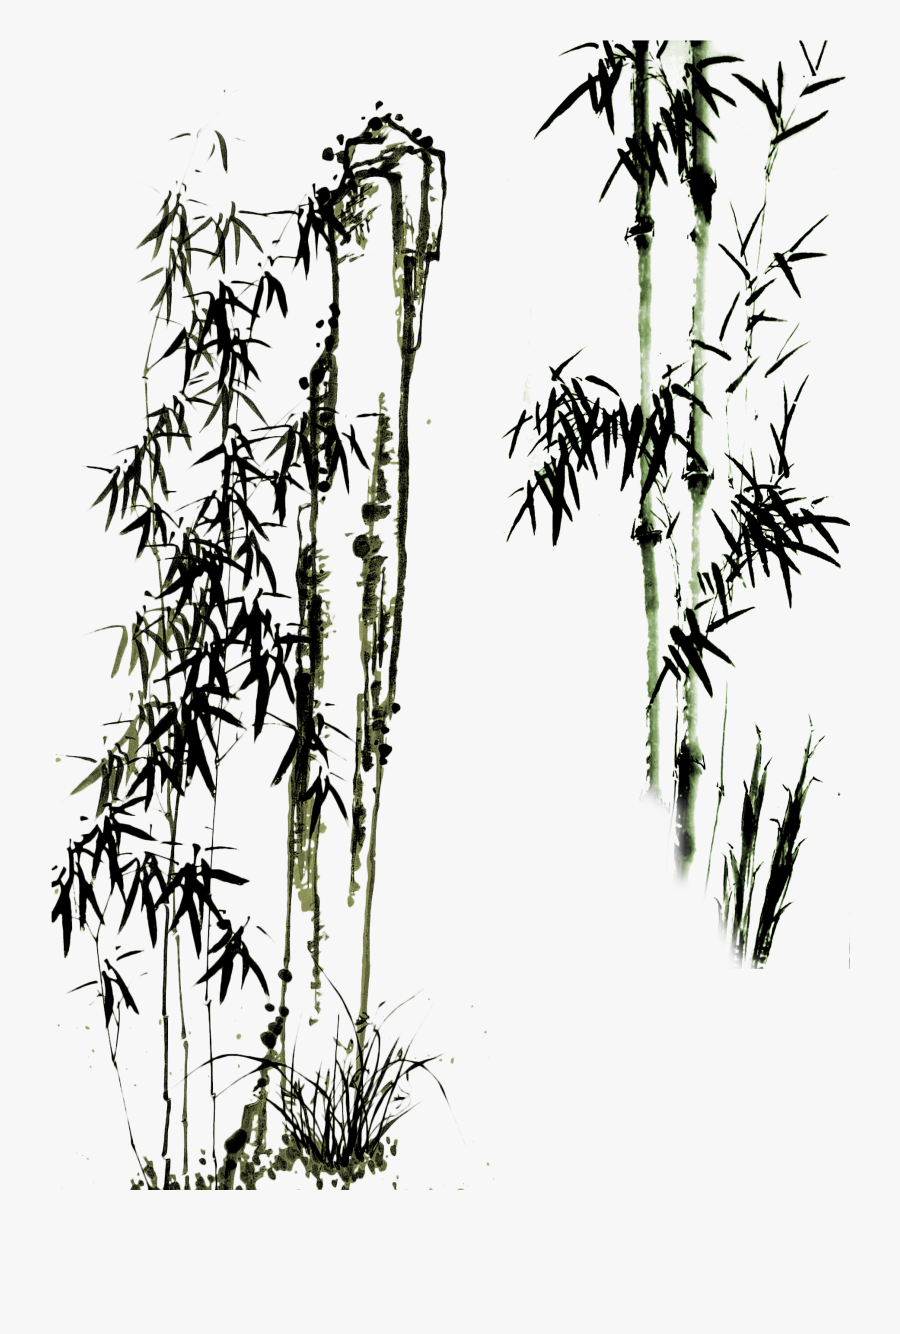 Paper Bamboo Chinese Painting - Chinese Painting Bamboo Png, Transparent Clipart